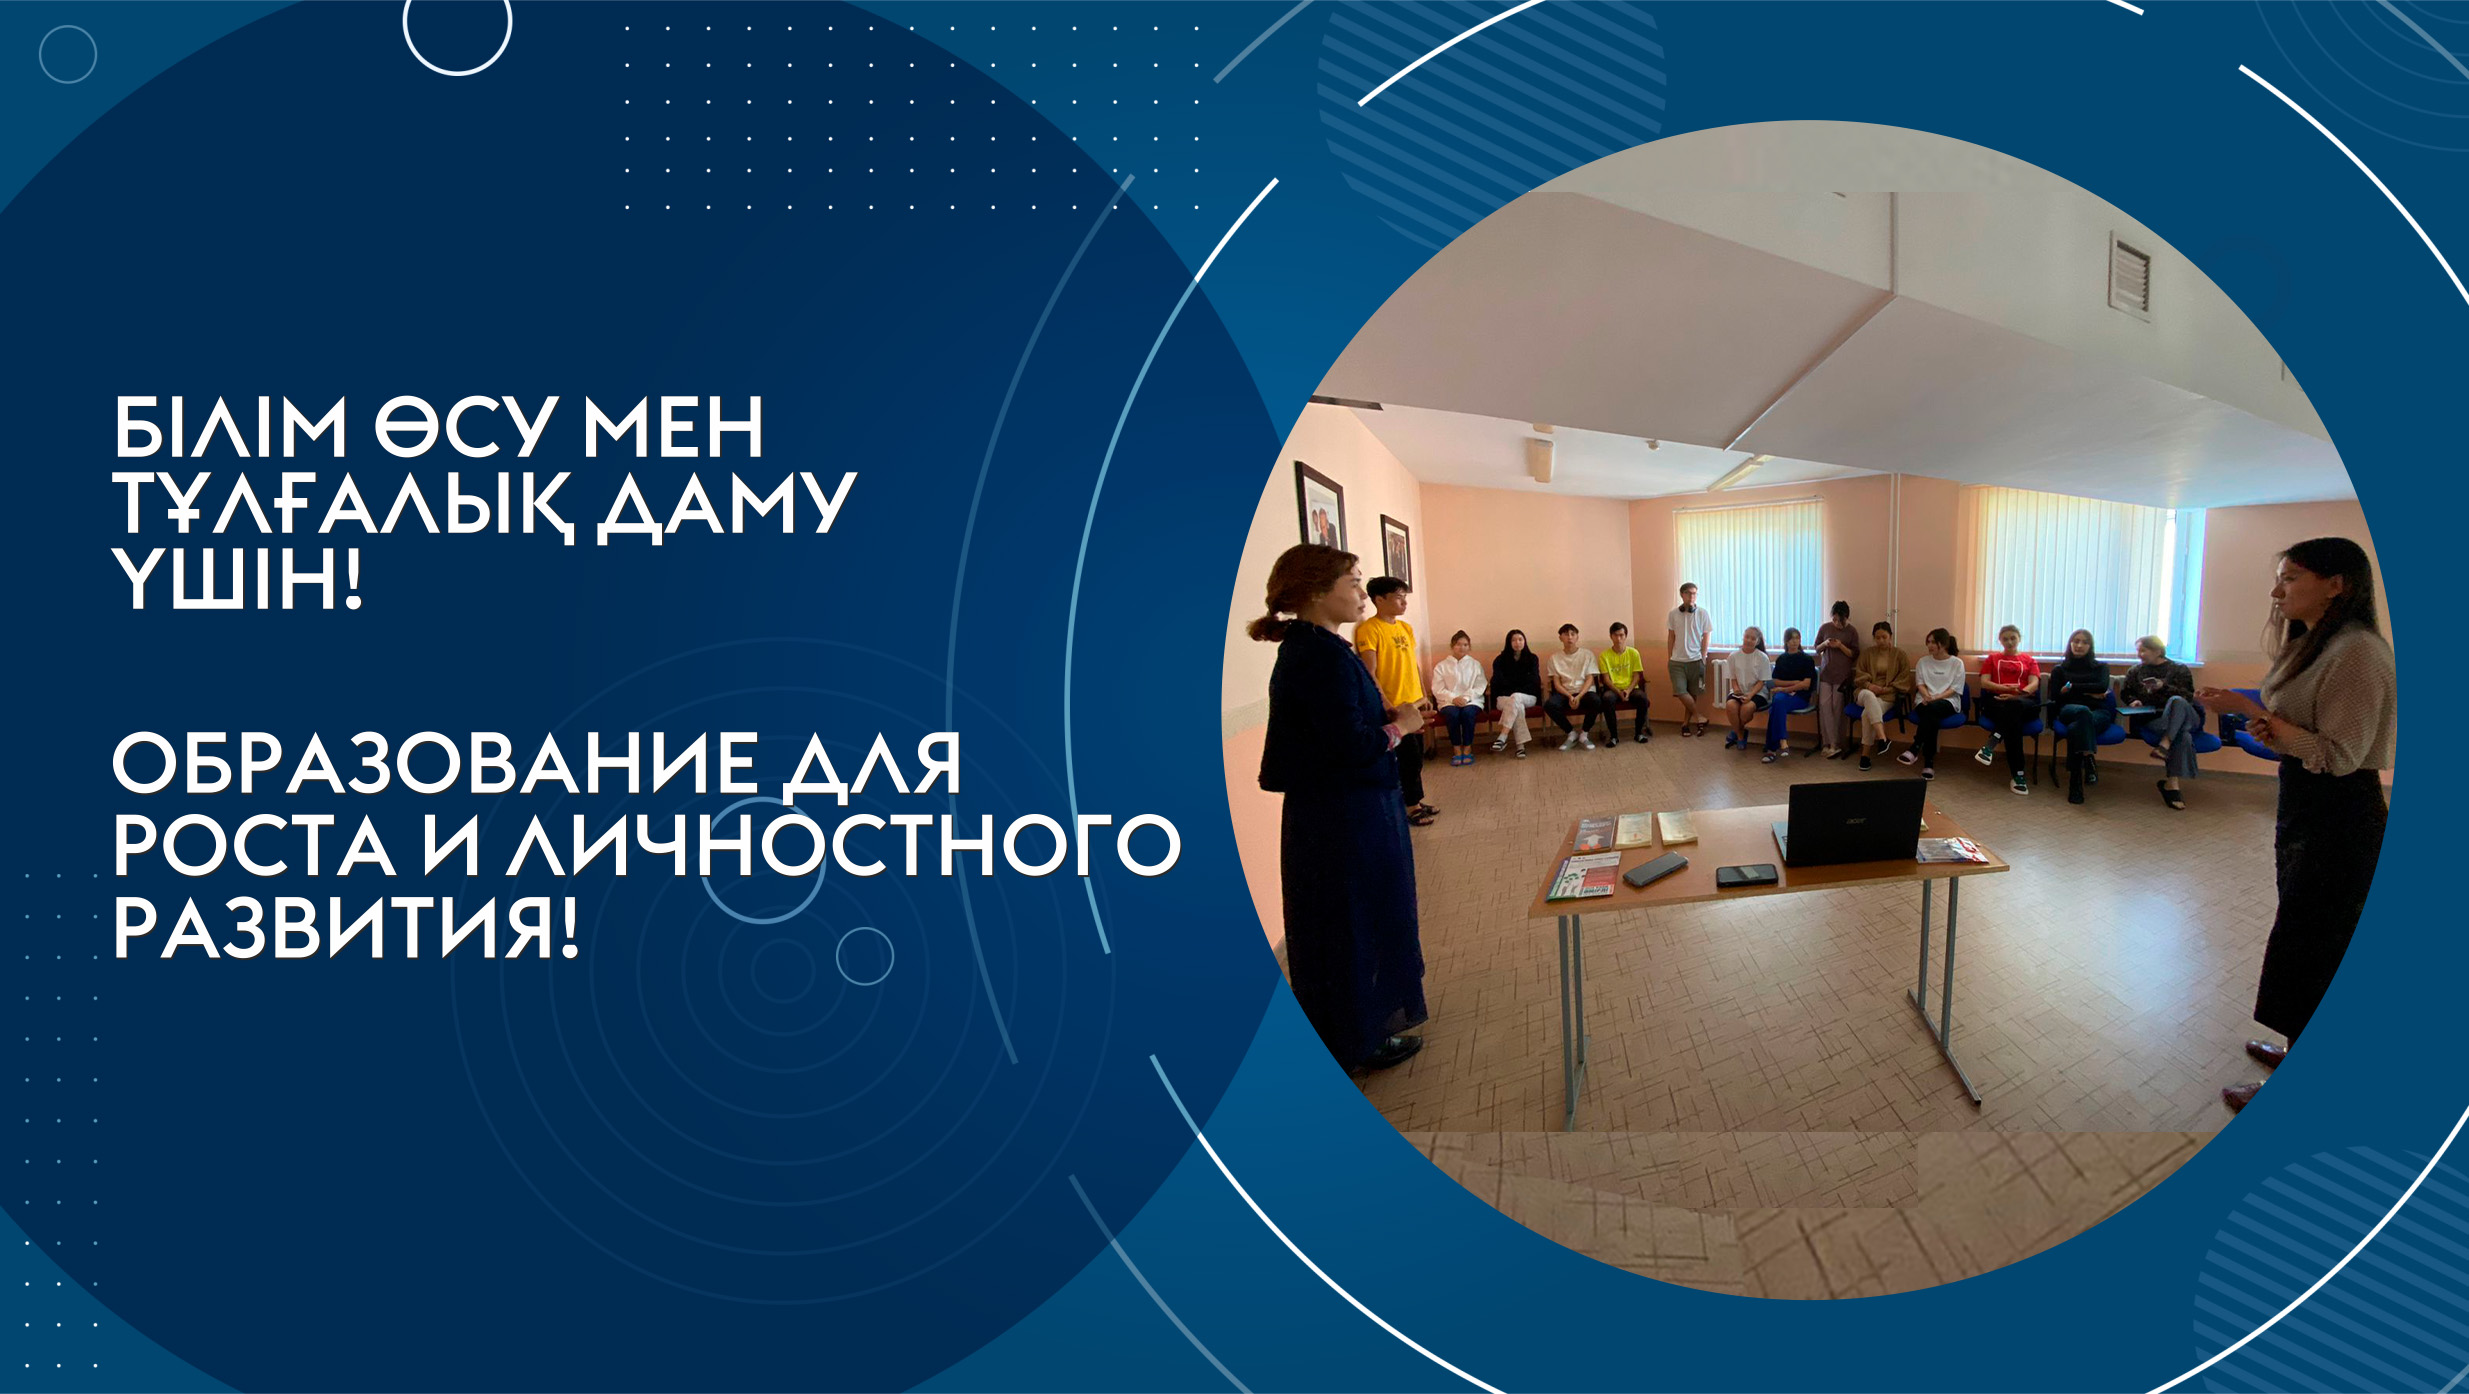 «Day of languages of the people of Kazakhstan»